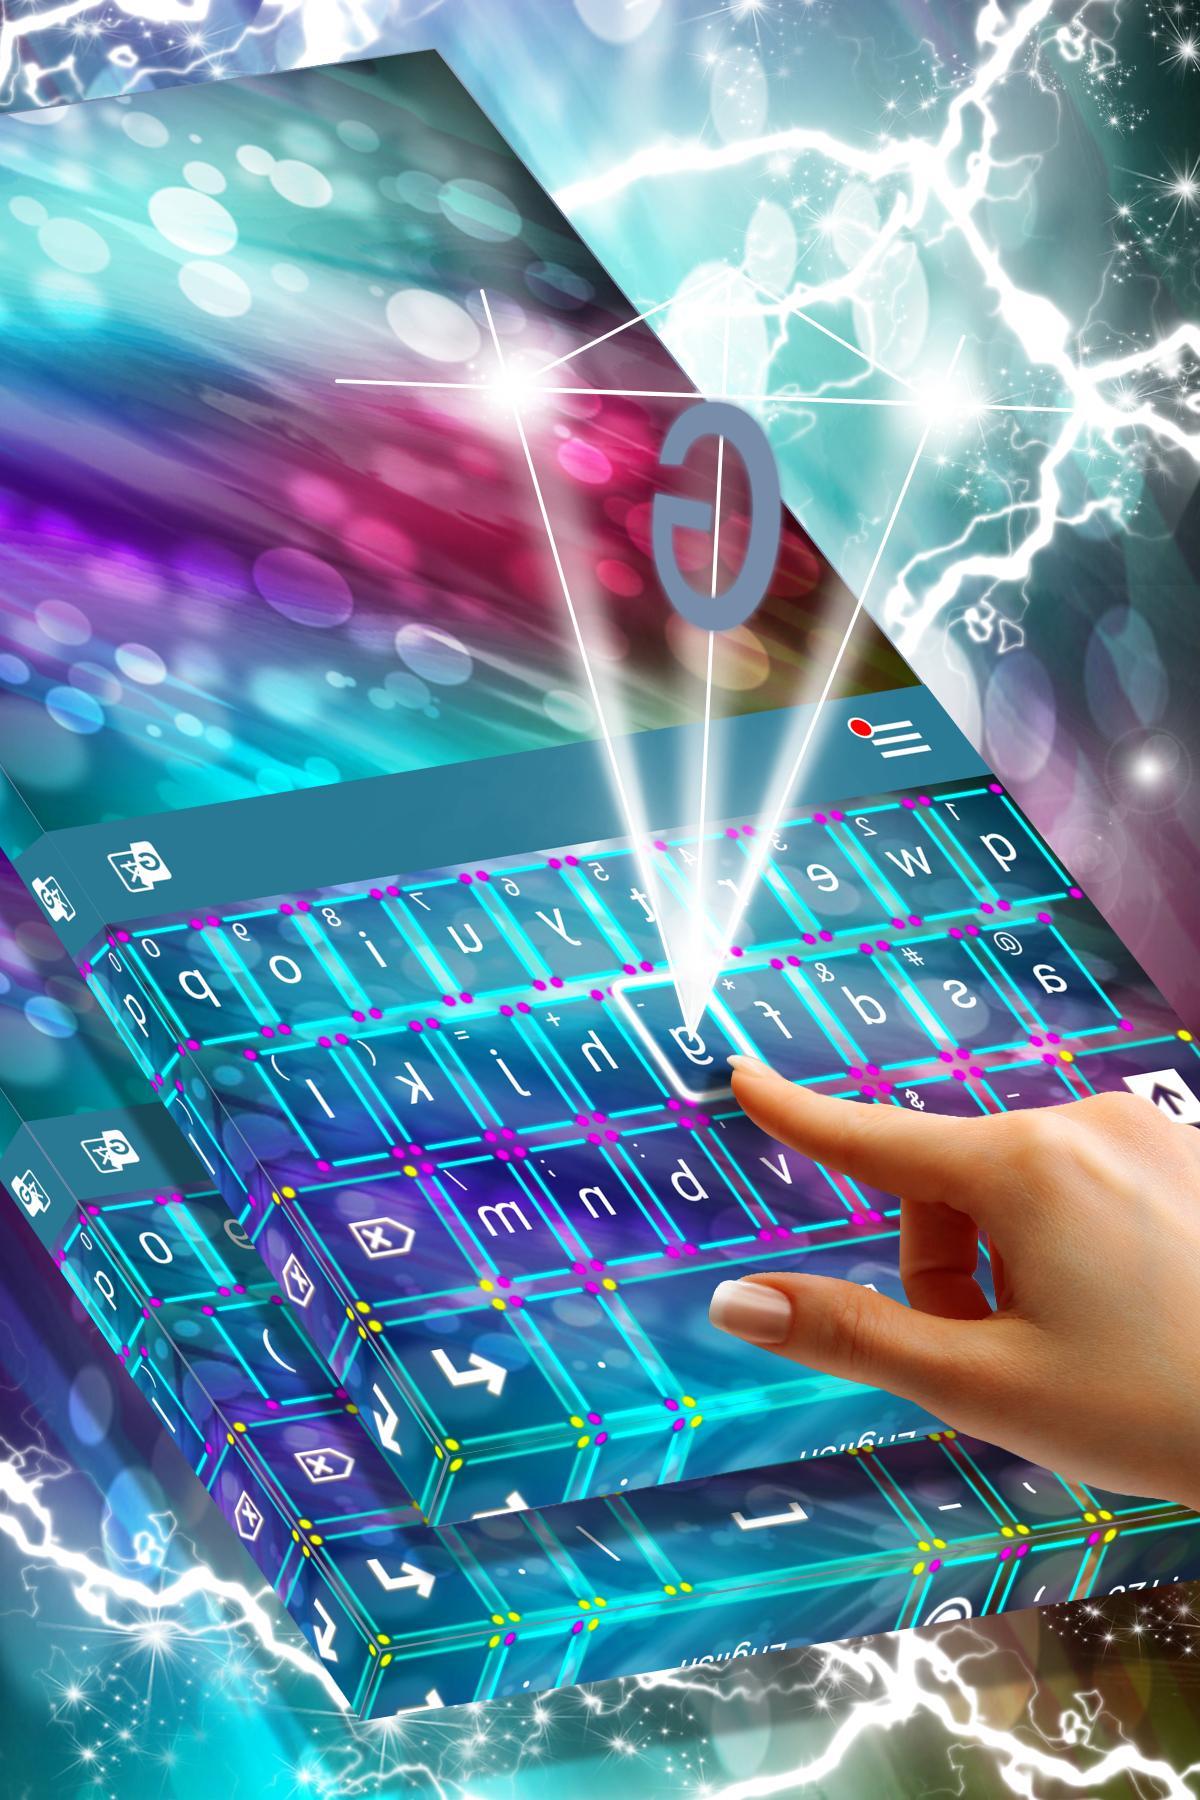 Cool Fantasy Keyboard Theme for Android - APK Download